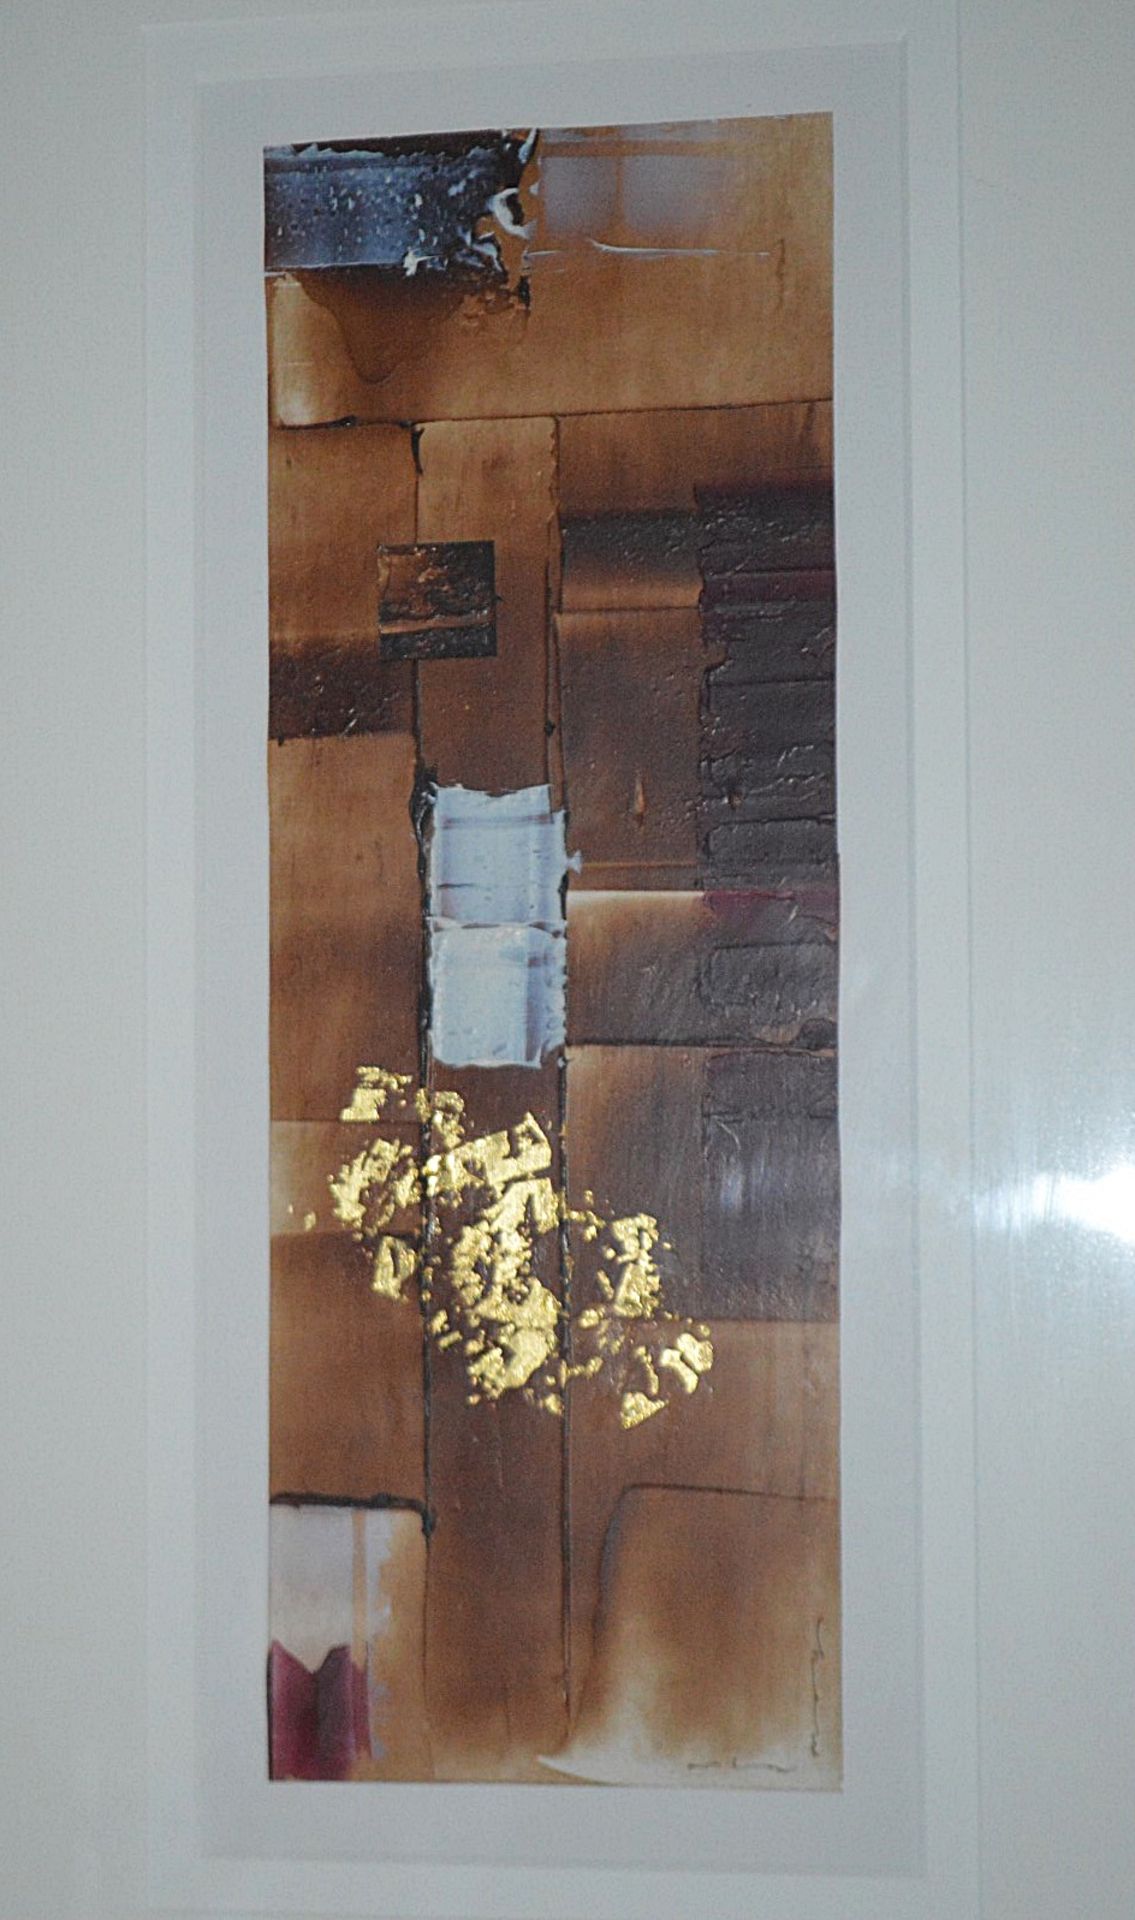 1 x Framed Original Mixed Media Oblong-Shaped Artwork By Orla May In Brown & Gold - Image 3 of 6